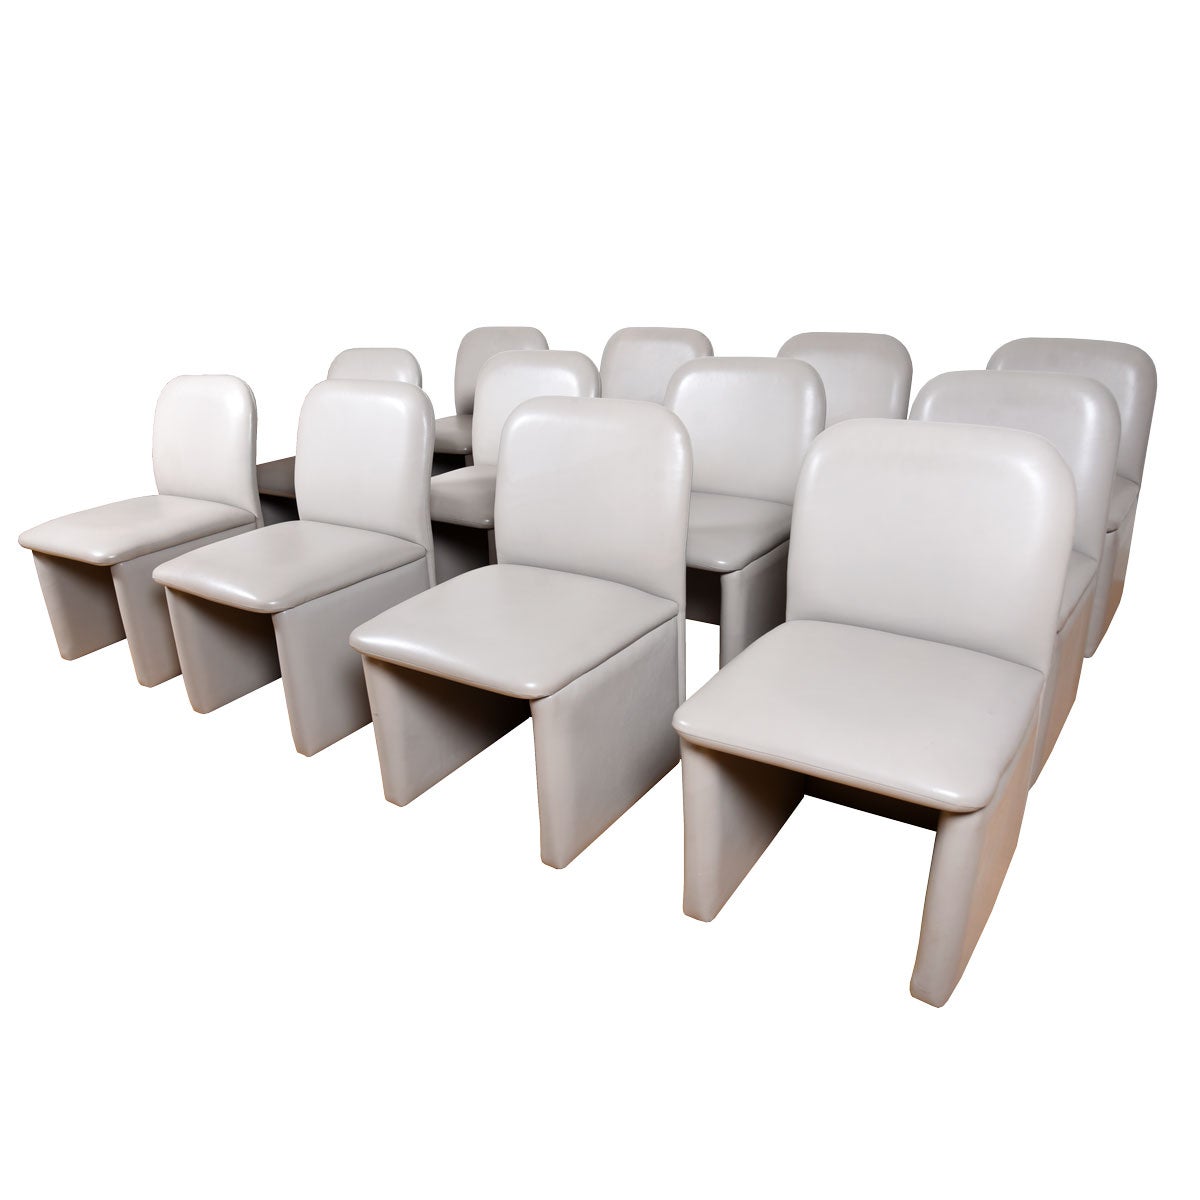 Set of 12 Contemporary Dining / Conference Chairs Fully Upholstered in Leather